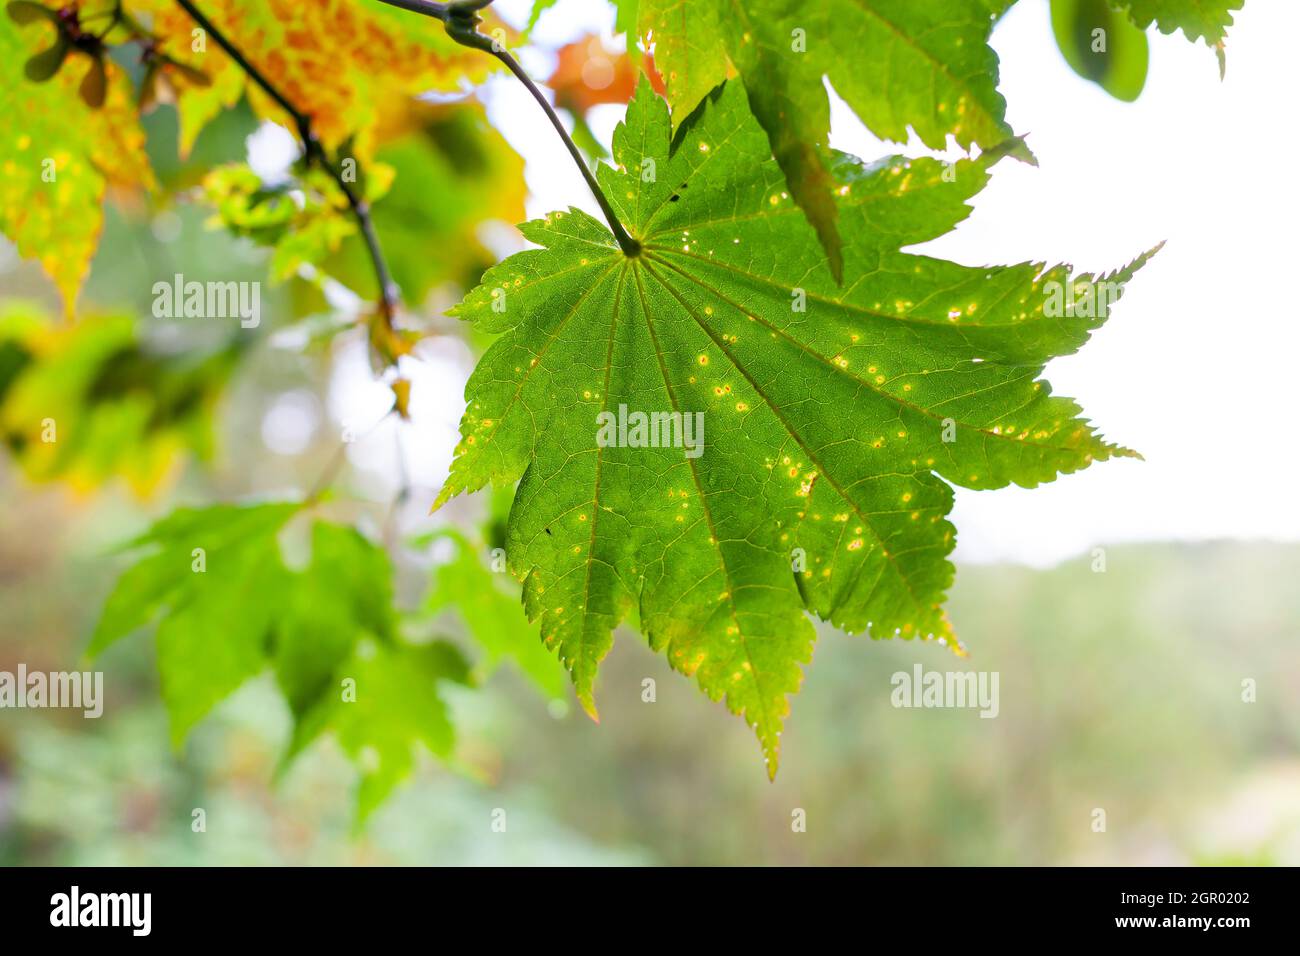 Green leaf background. Nature and seasons. Stock Photo